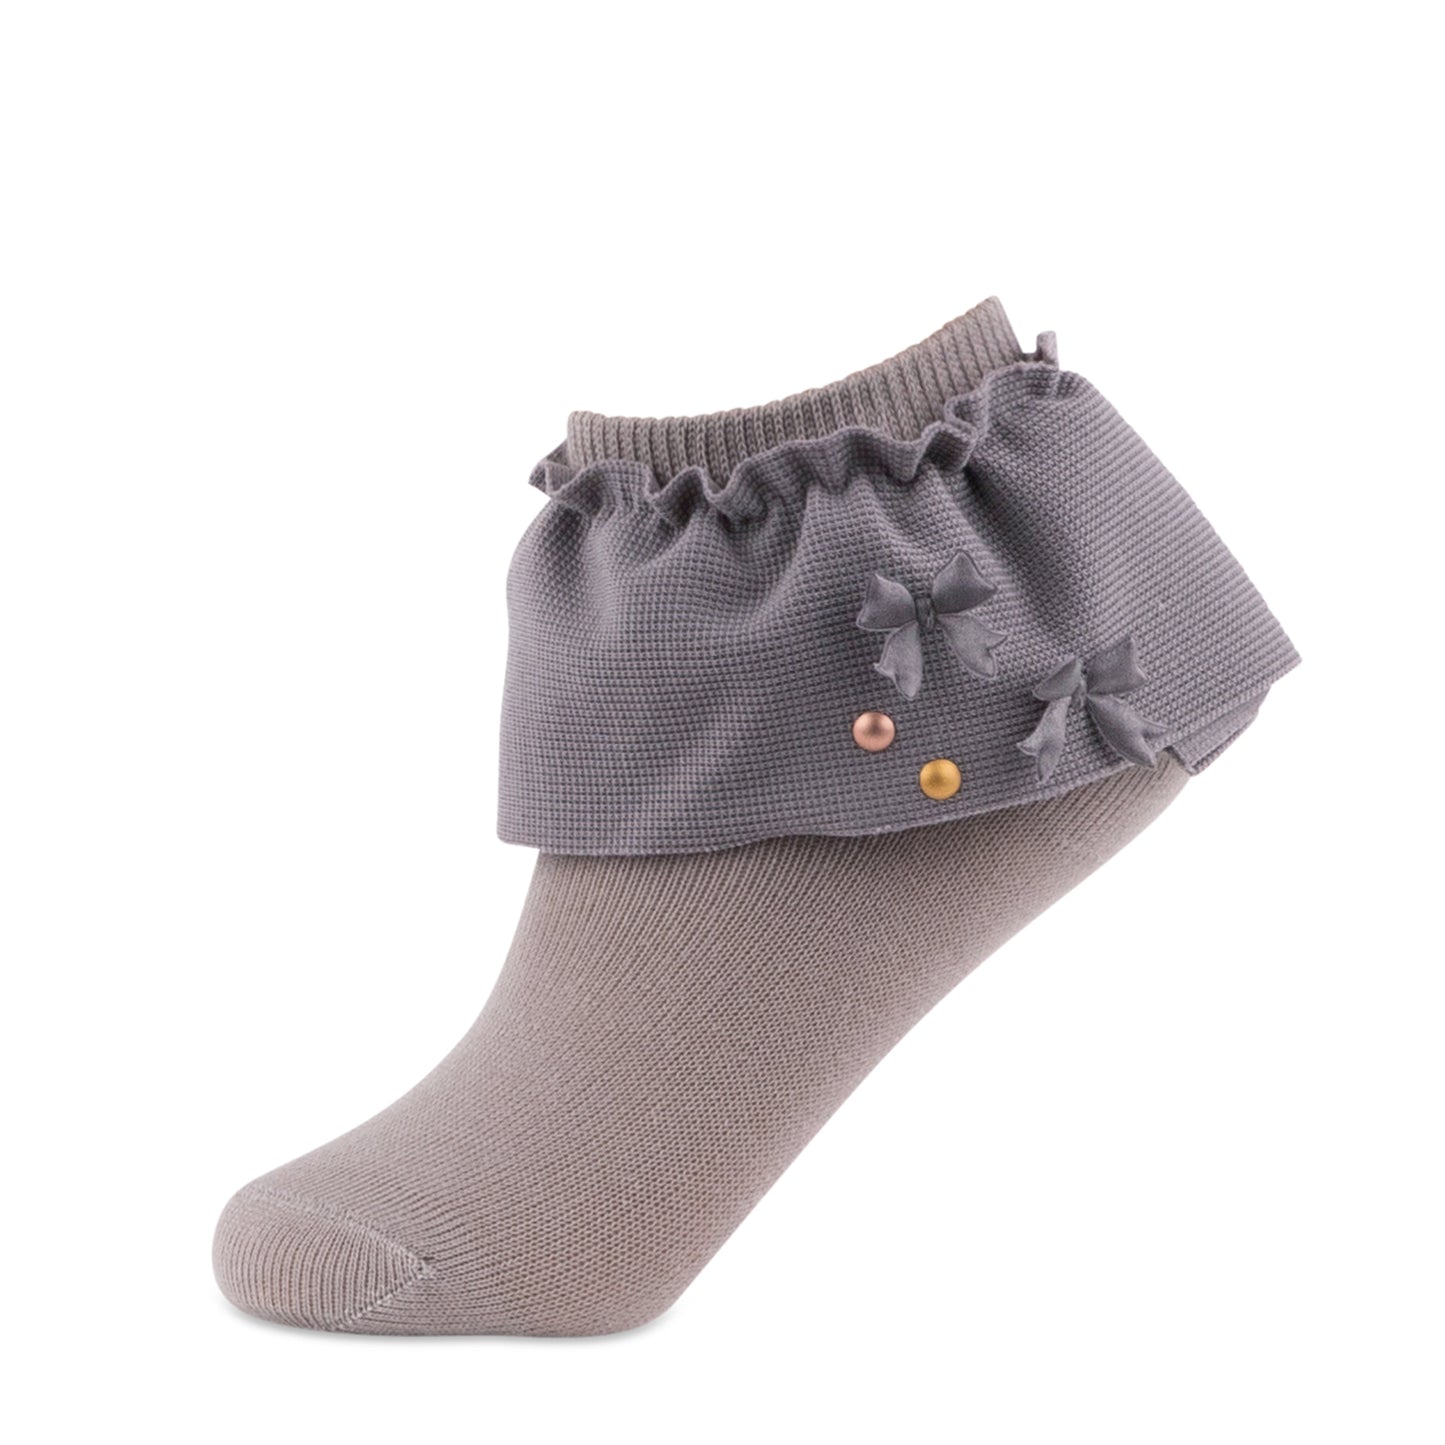 jrp socks gray dreamy lace anklet sock with bows